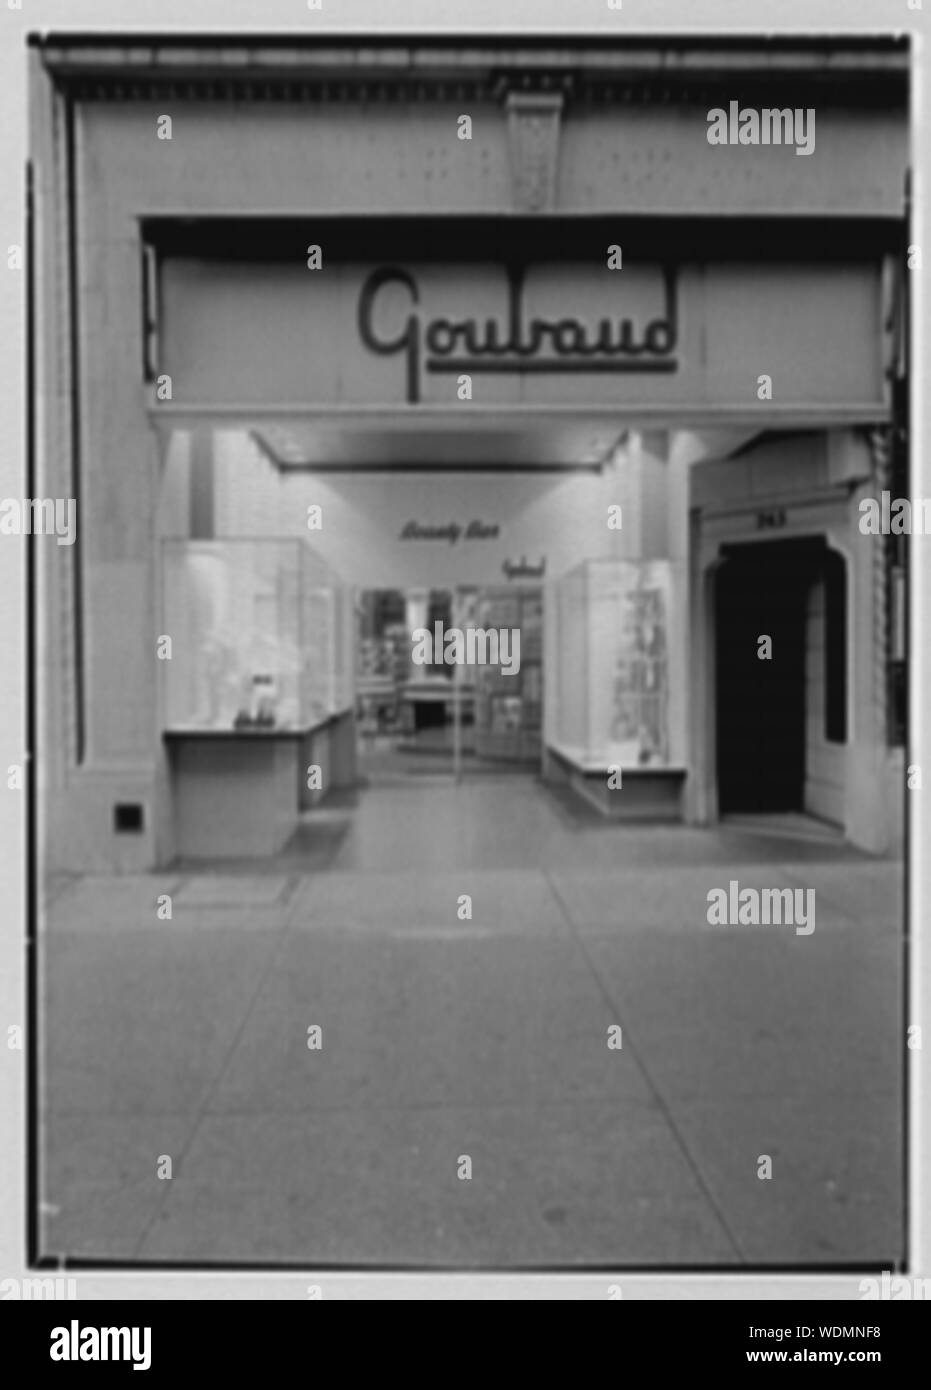 Goubaud Beauty Bar, business at 743 5th Ave., New York City. Abstract/medium: Gottscho-Schleisner Collection Stock Photo